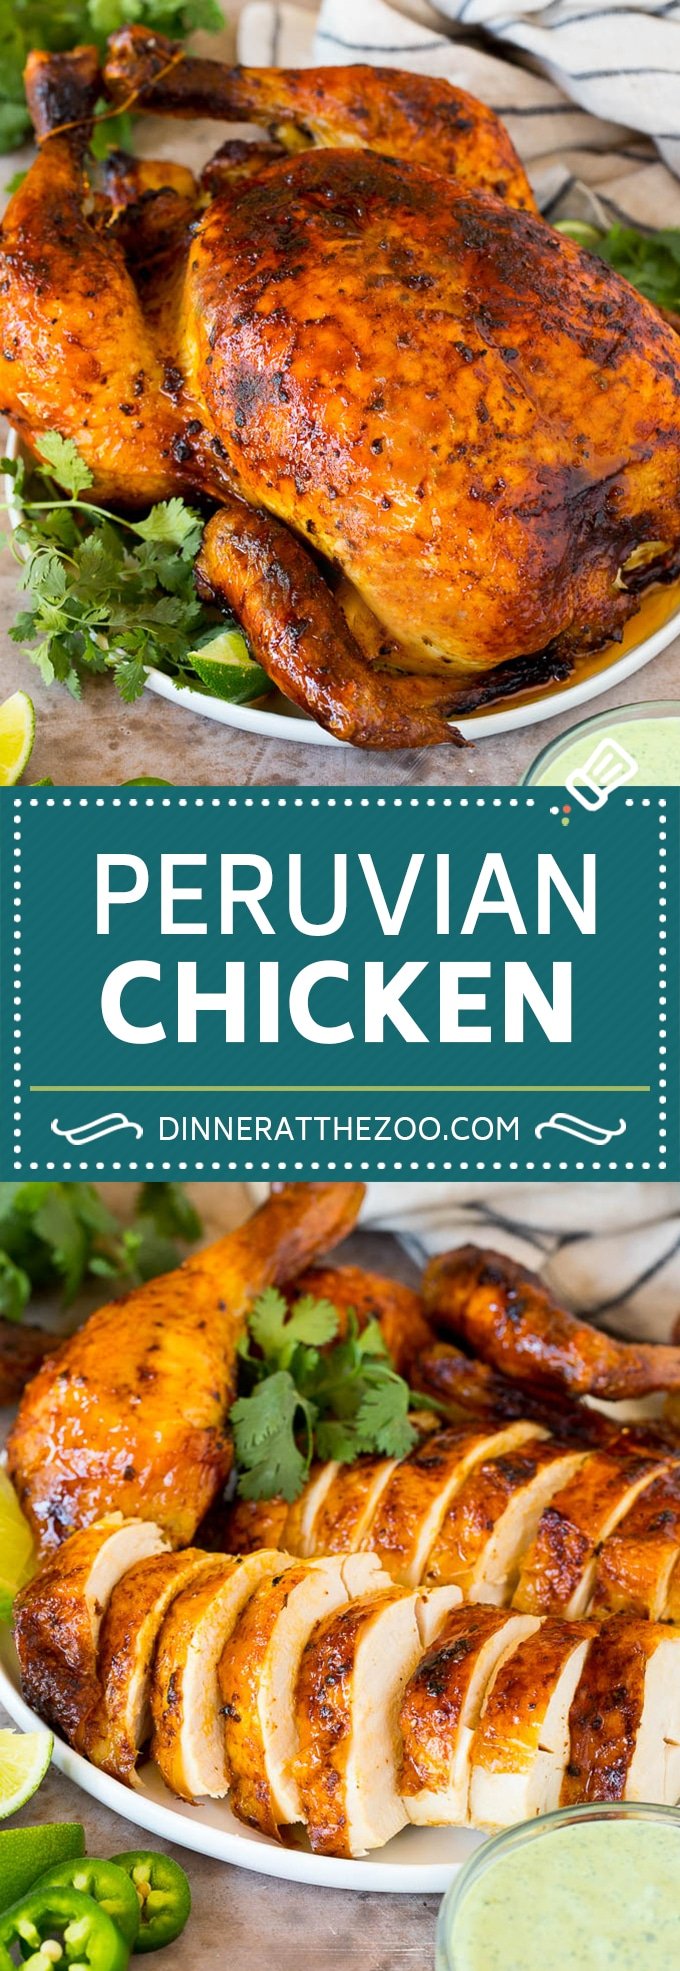 This Peruvian chicken is a whole chicken marinated in a zesty variety of herbs and spices, then roasted to golden brown perfection.